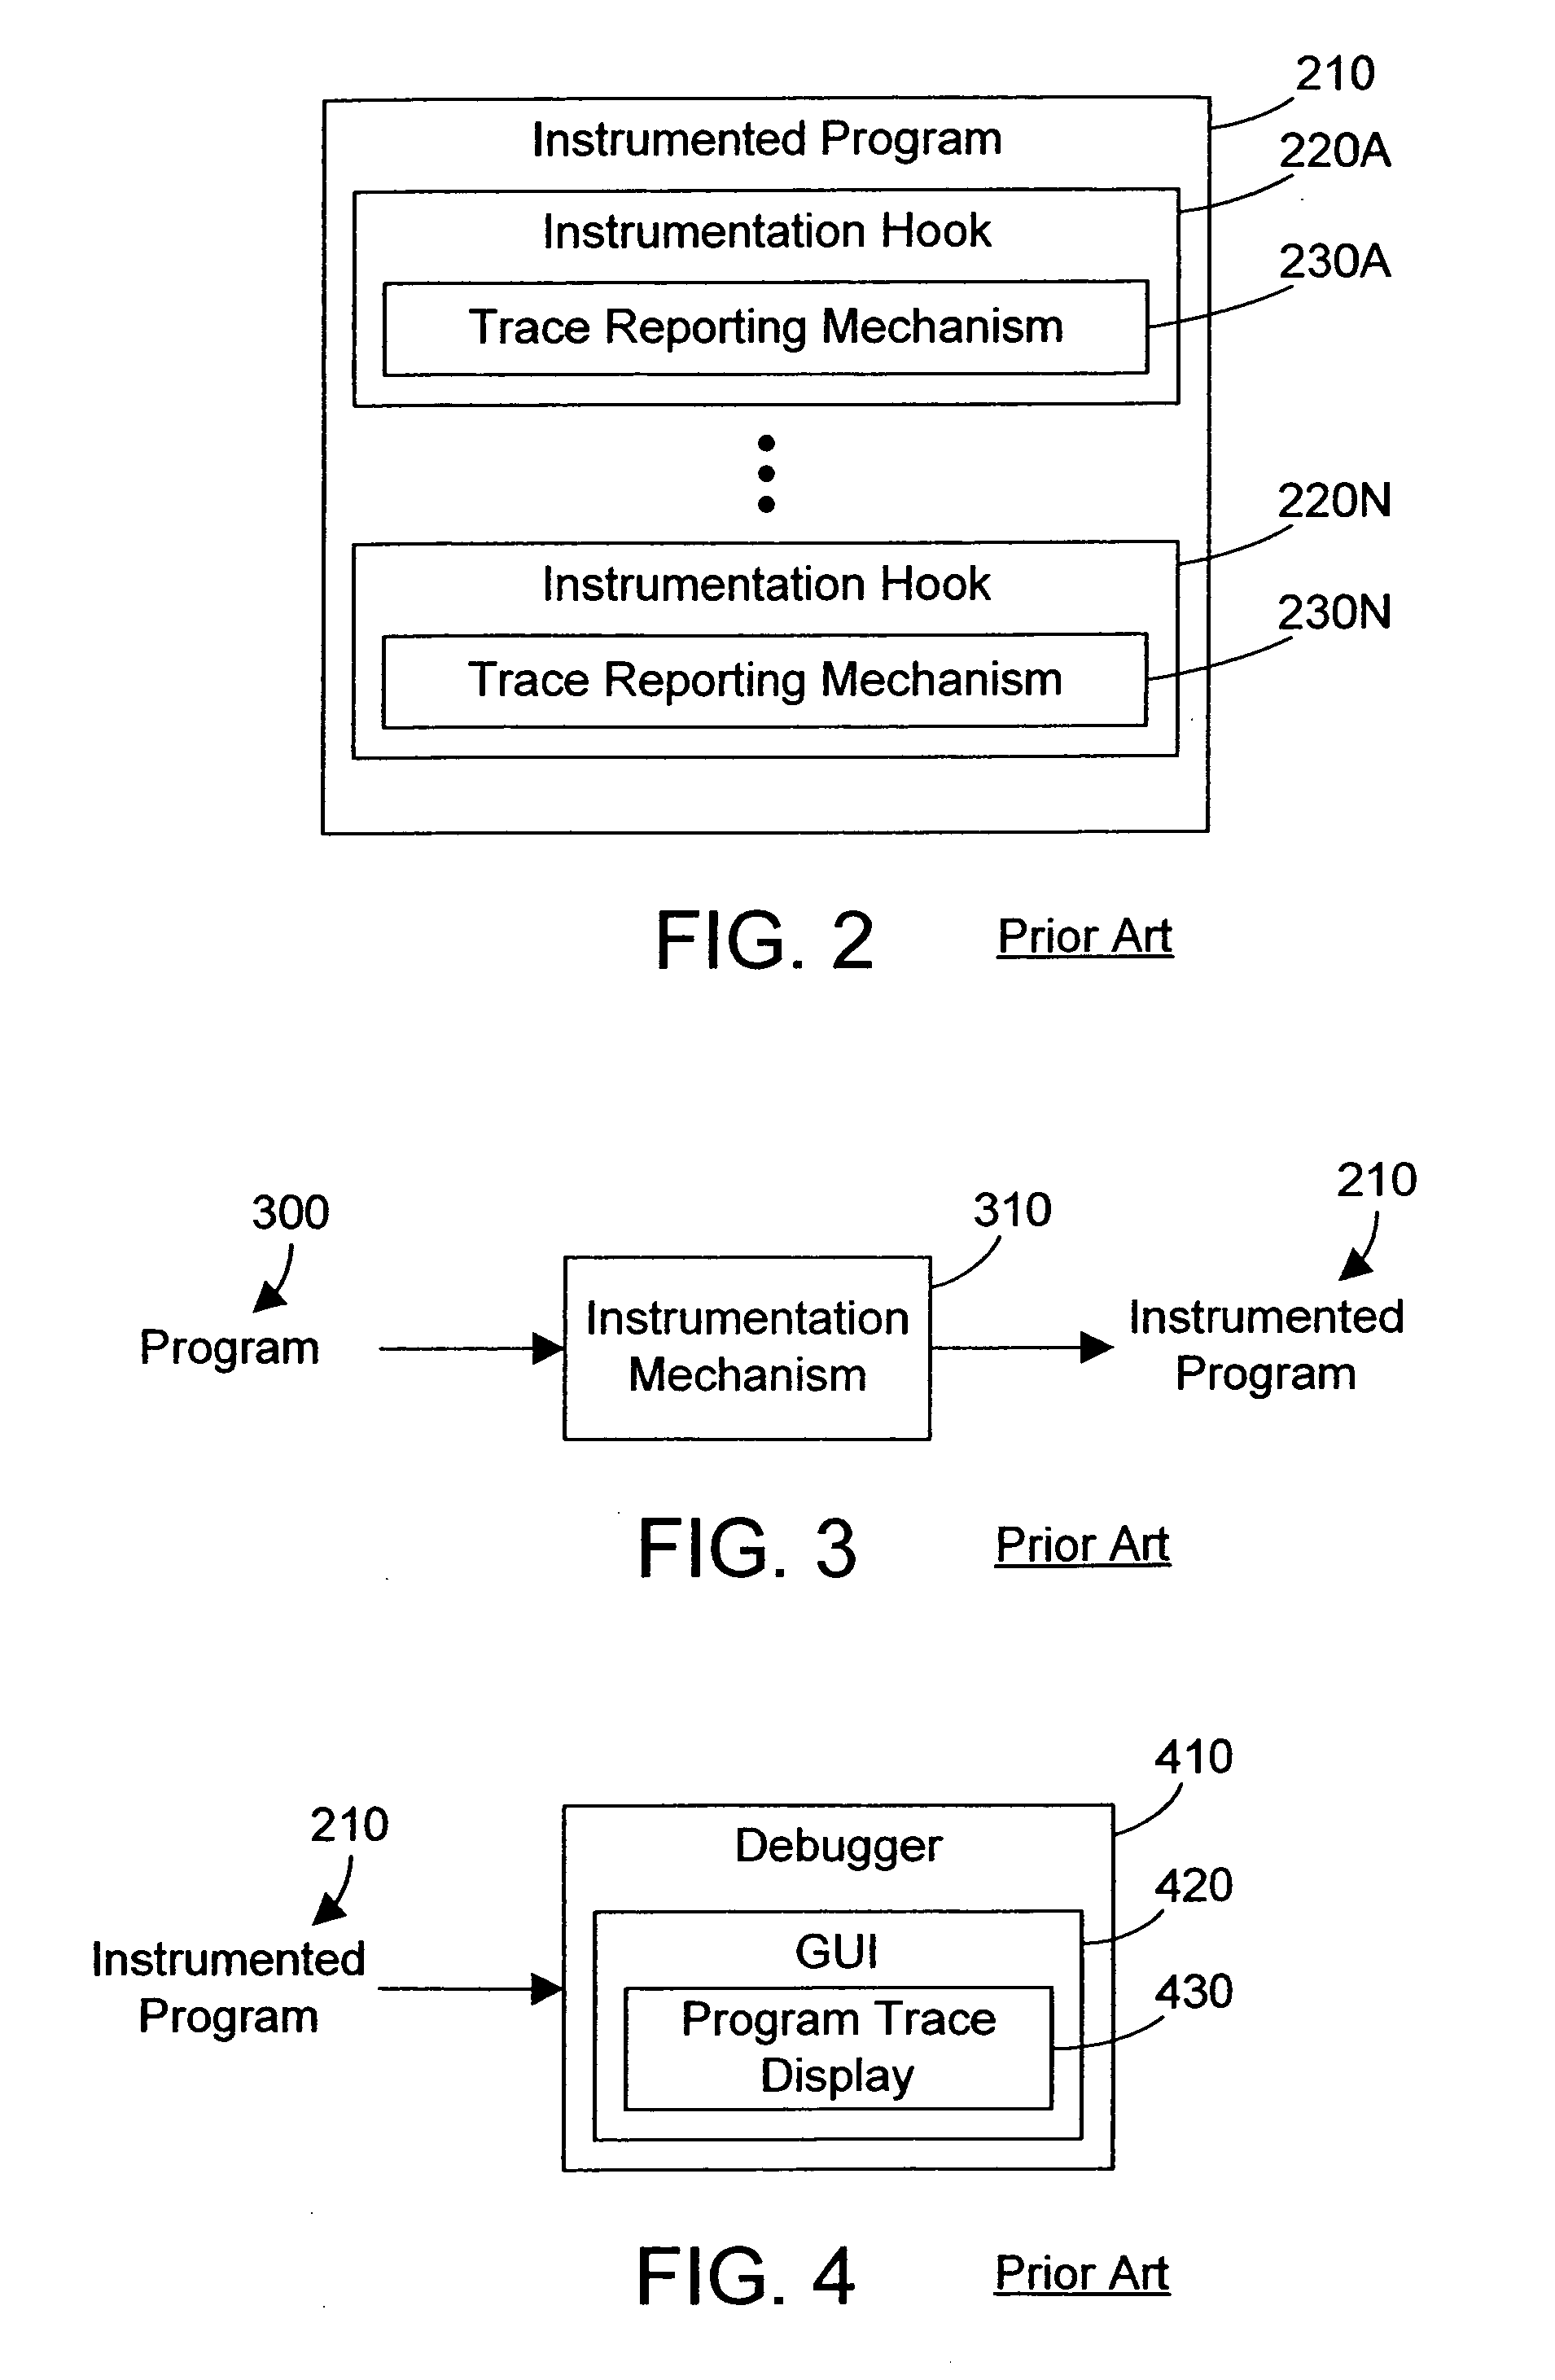 Debugger apparatus and method for indicating time-correlated position of threads in a multi-threaded computer program